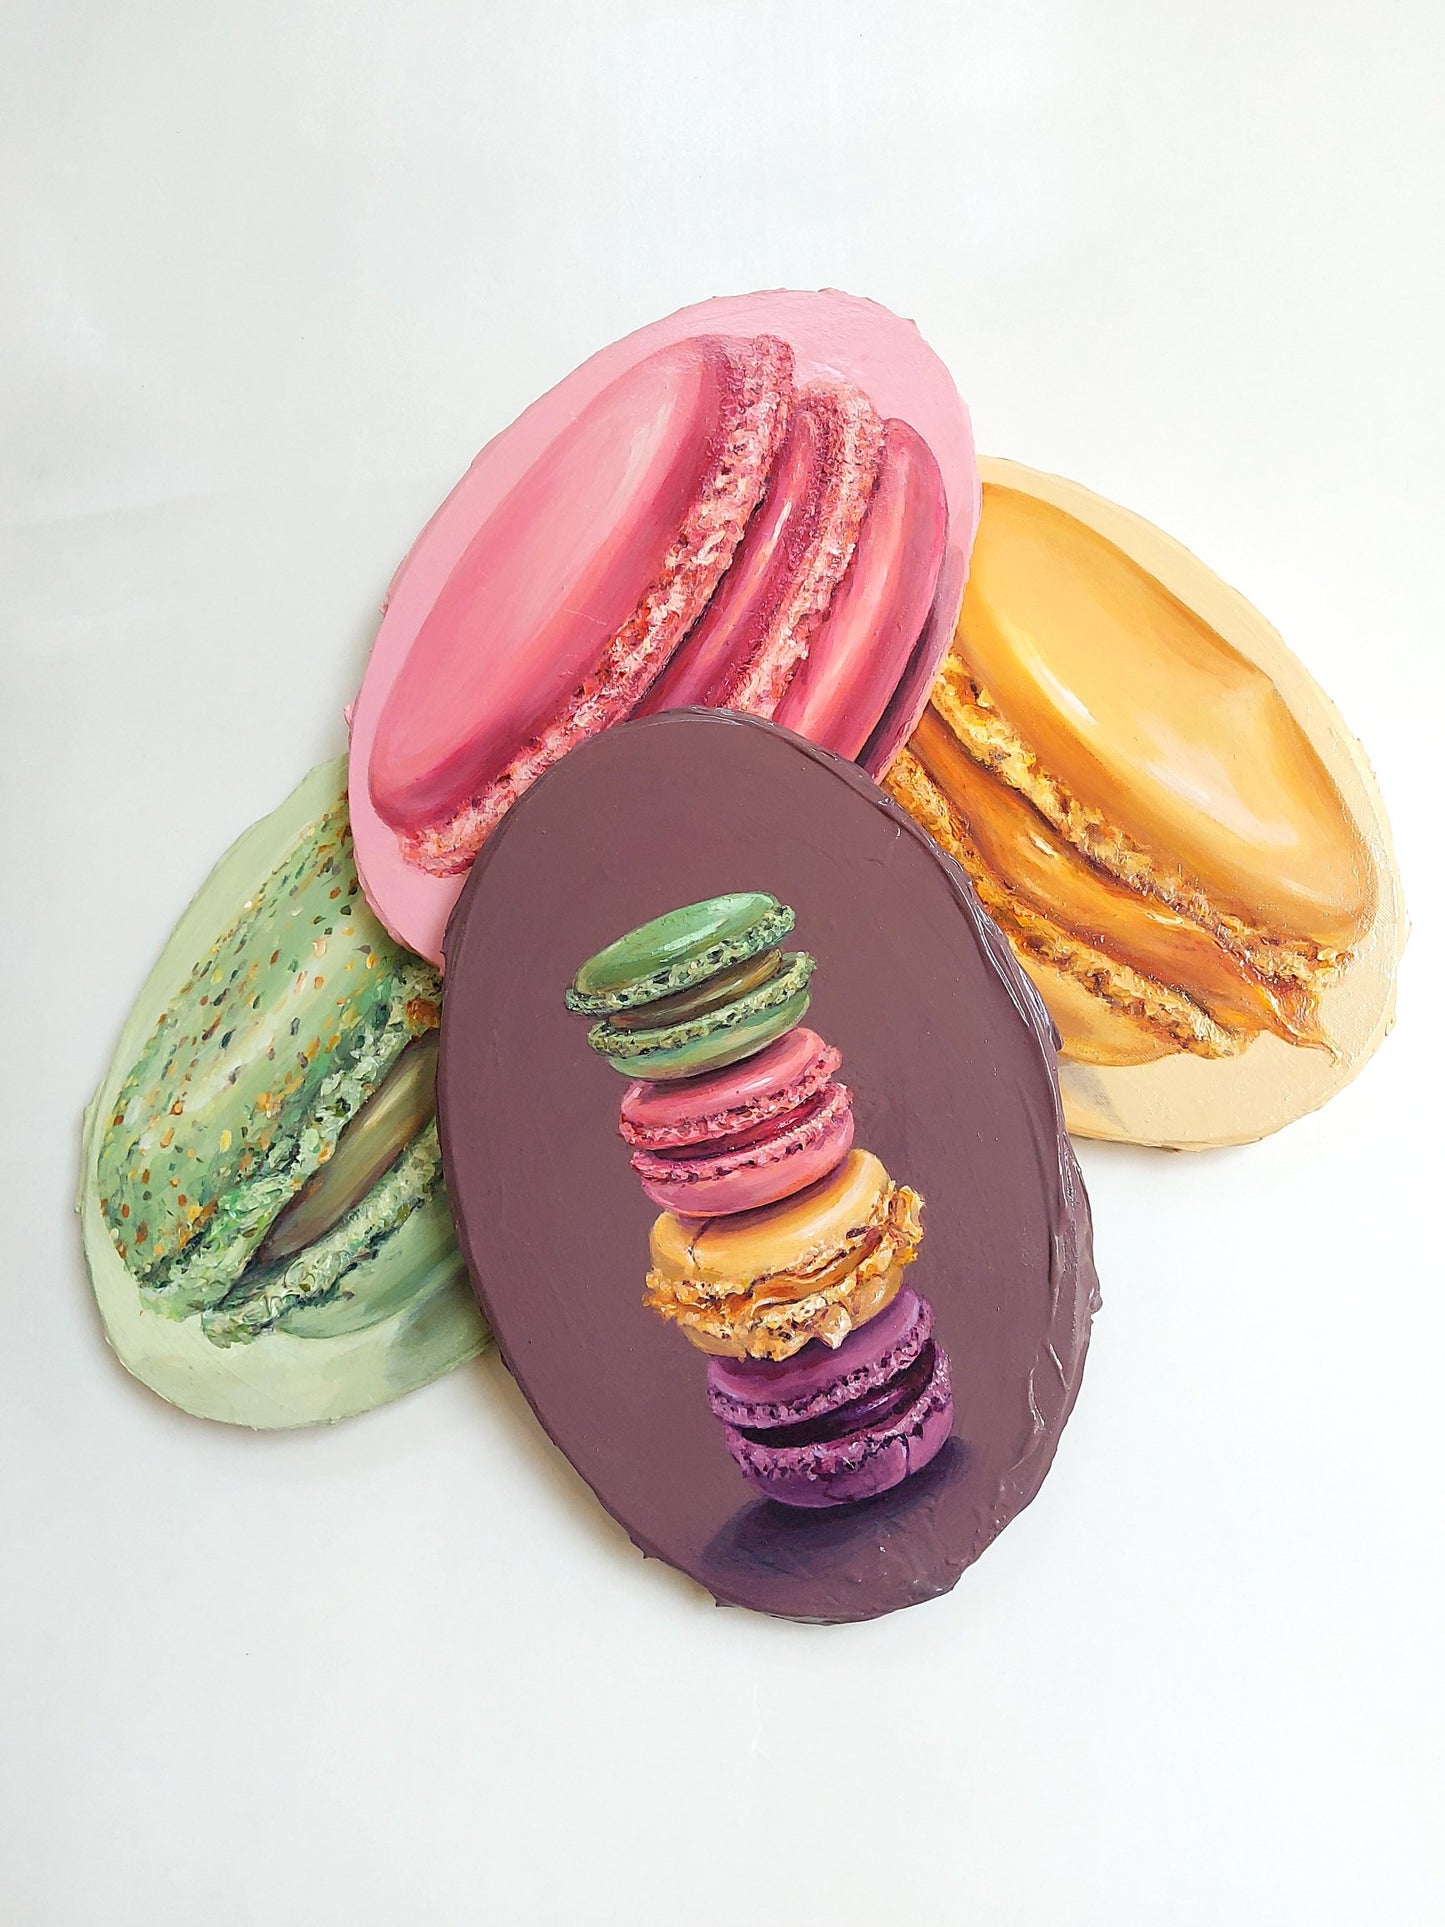 Stack of Macarons